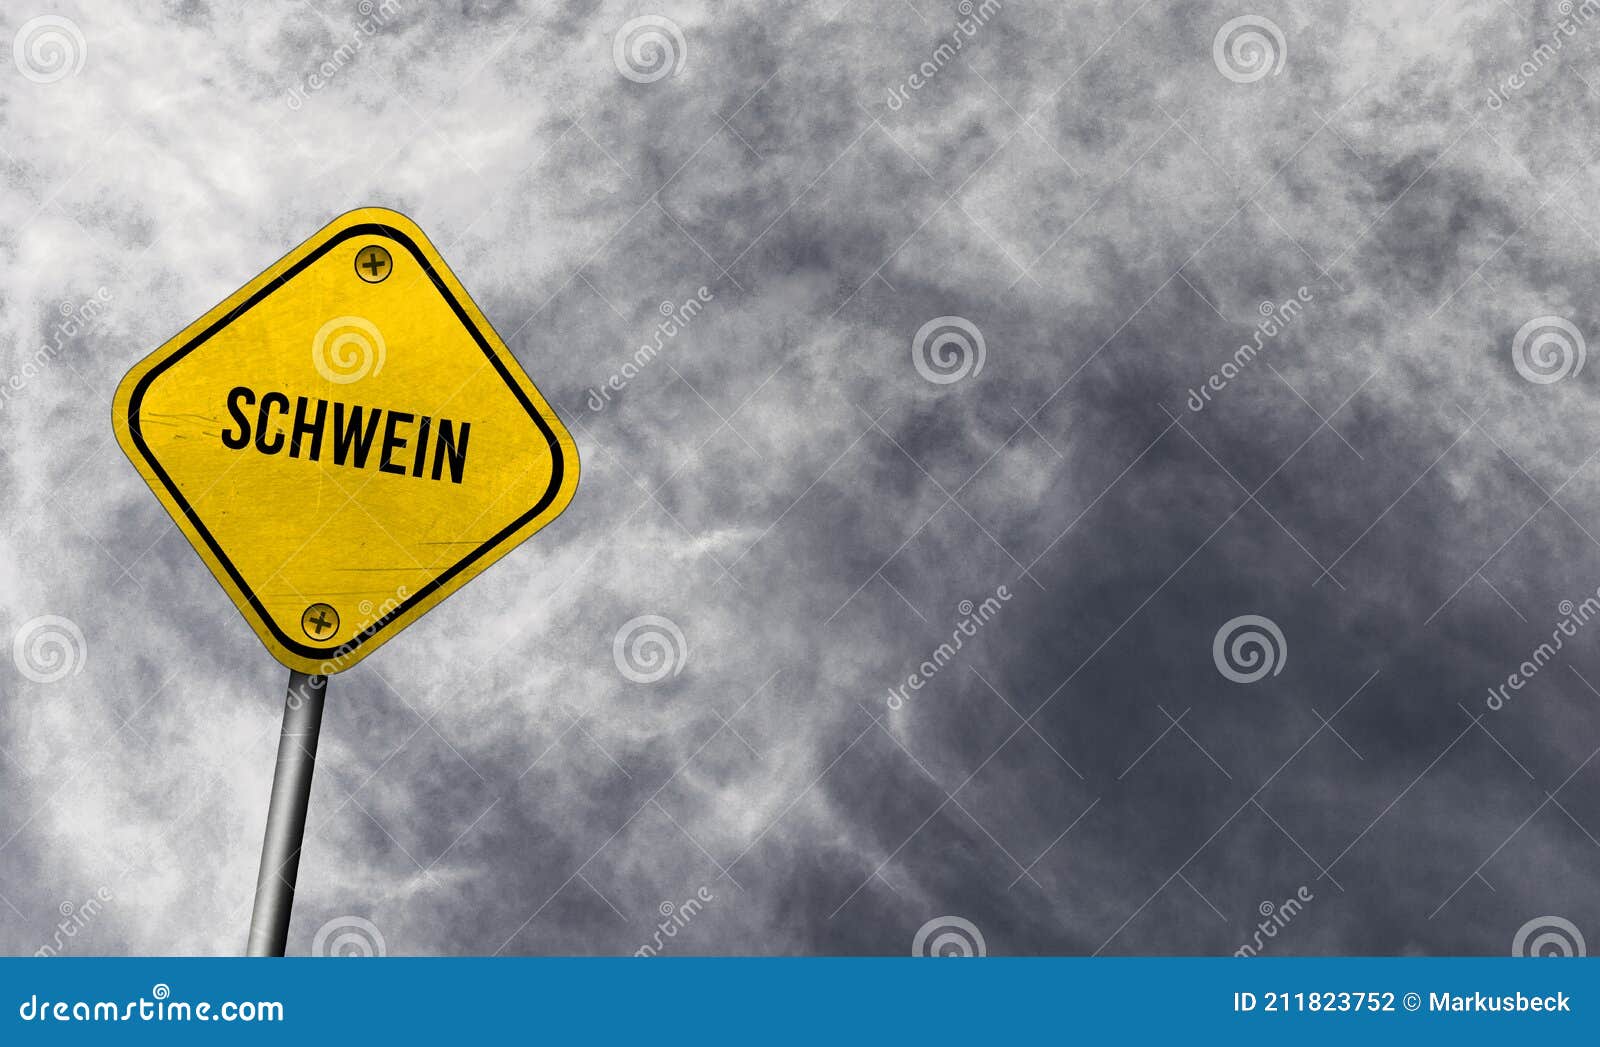 schwein - yellow sign with cloudy background